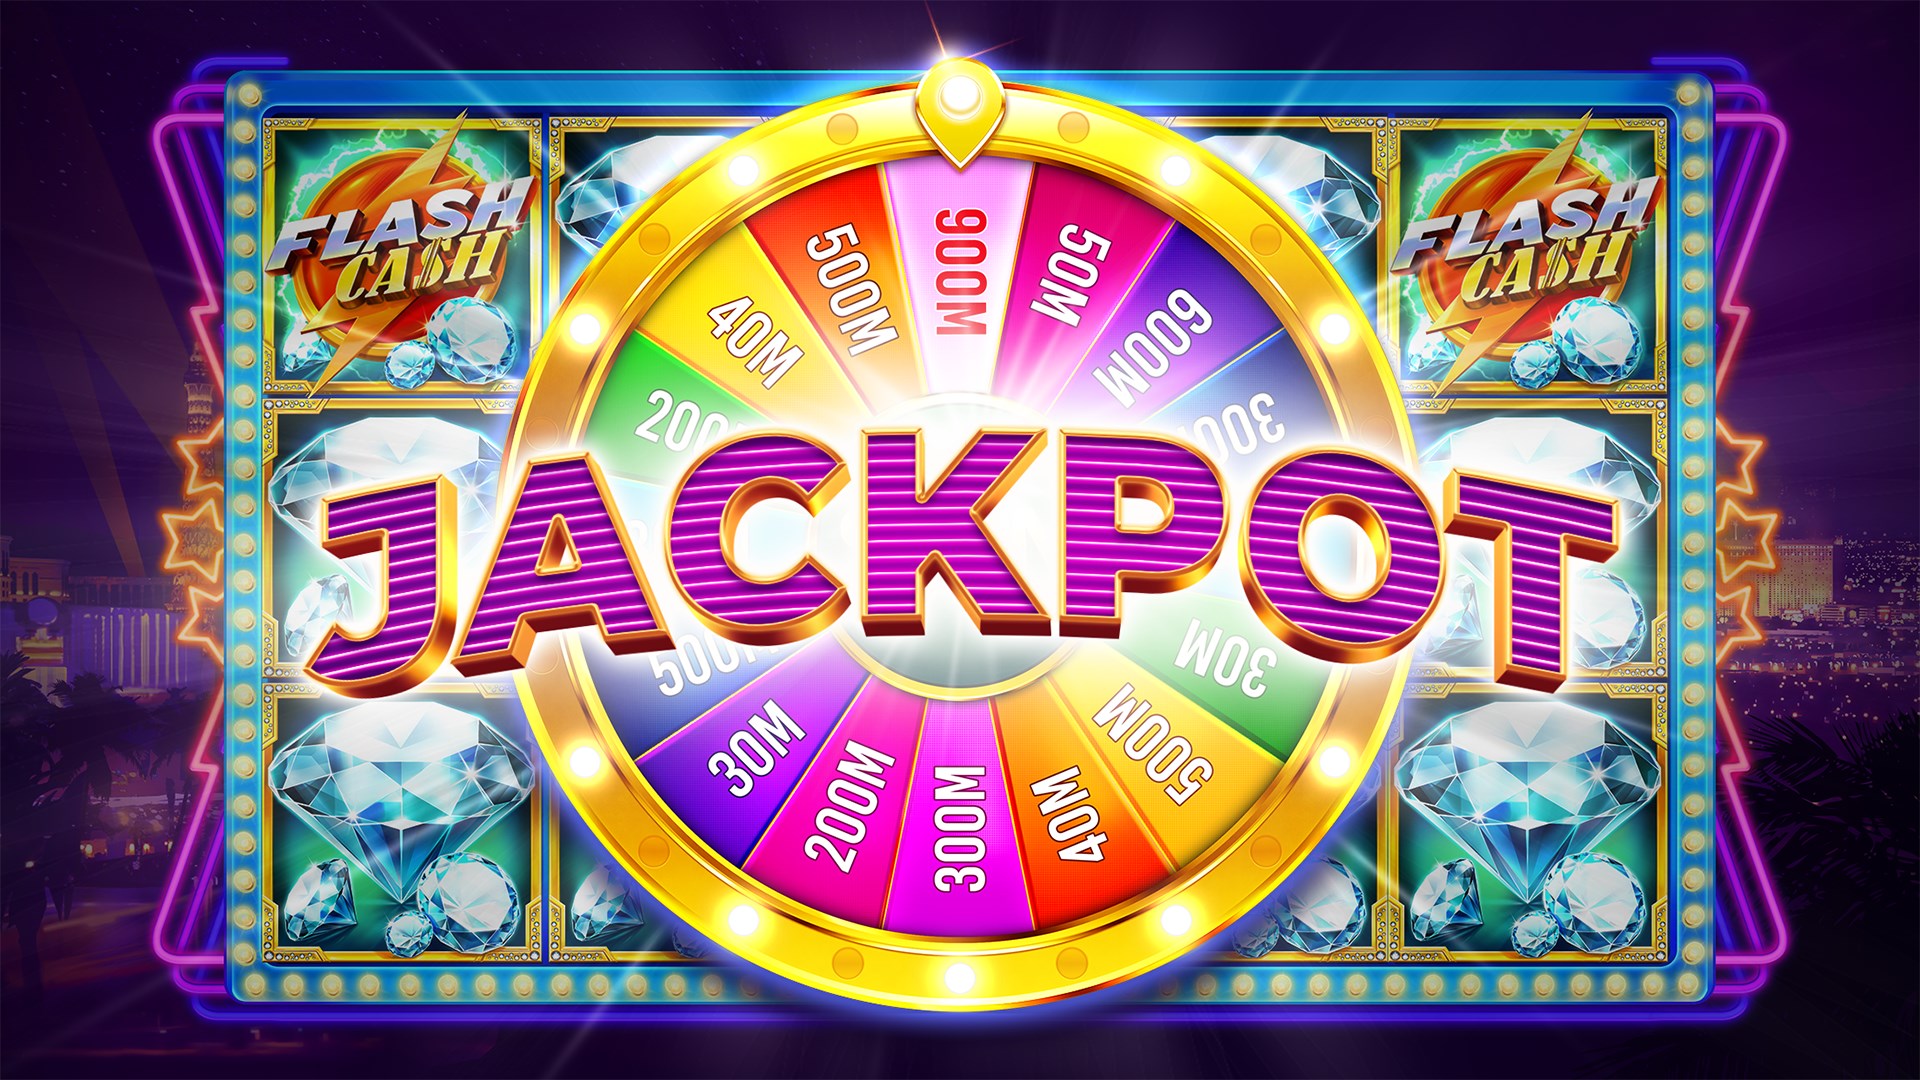 Read more about the article Online Slot Machines<div class="yasr-vv-stars-title-container"><div class='yasr-stars-title yasr-rater-stars'
                          id='yasr-visitor-votes-readonly-rater-db56a65b15b84'
                          data-rating='0'
                          data-rater-starsize='16'
                          data-rater-postid='2458'
                          data-rater-readonly='true'
                          data-readonly-attribute='true'
                      ></div><span class='yasr-stars-title-average'>0 (0)</span></div>